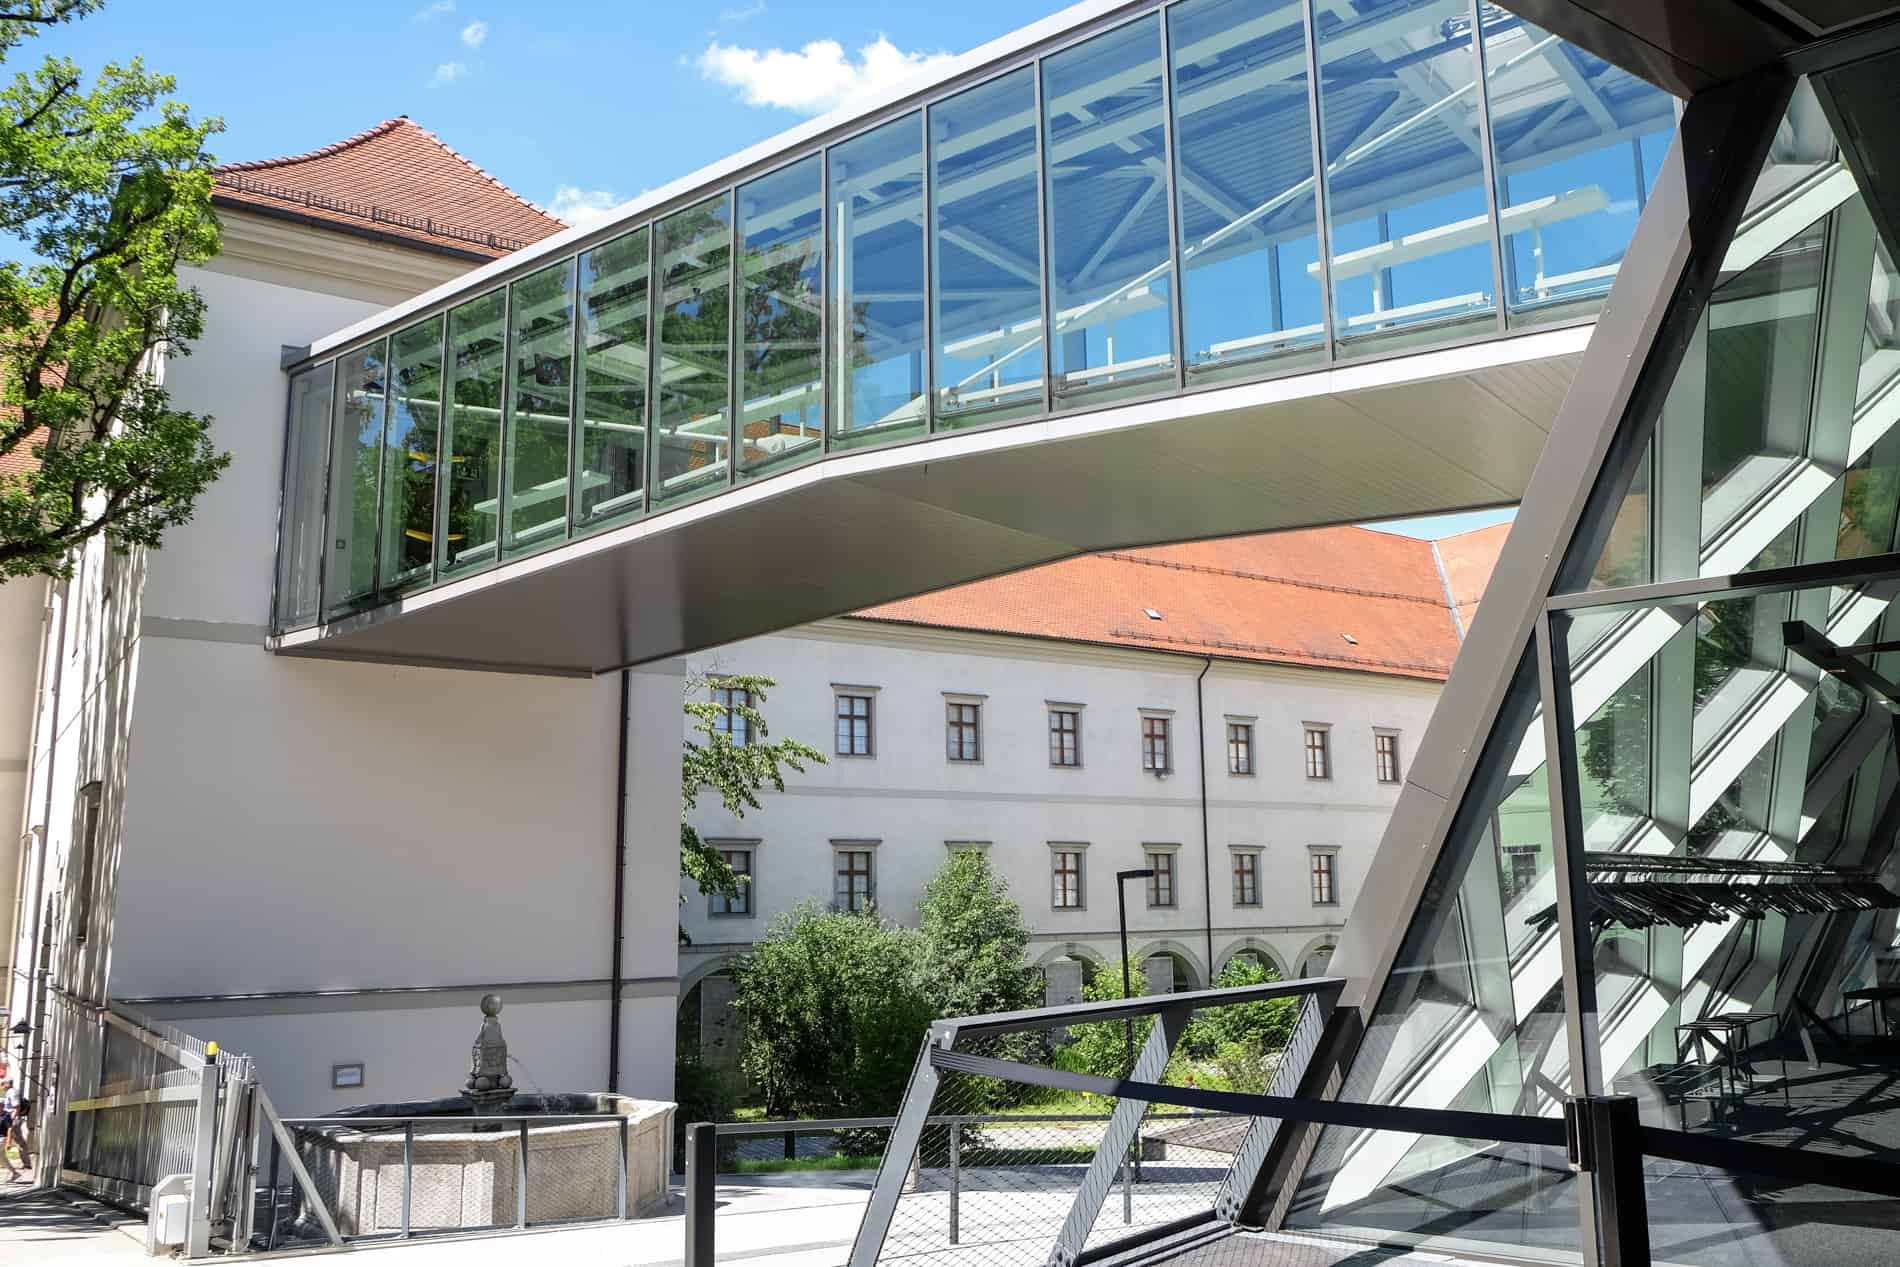 A glass tunnel leading to an old white building - the modern construction of the South Wing of Linz Castle.